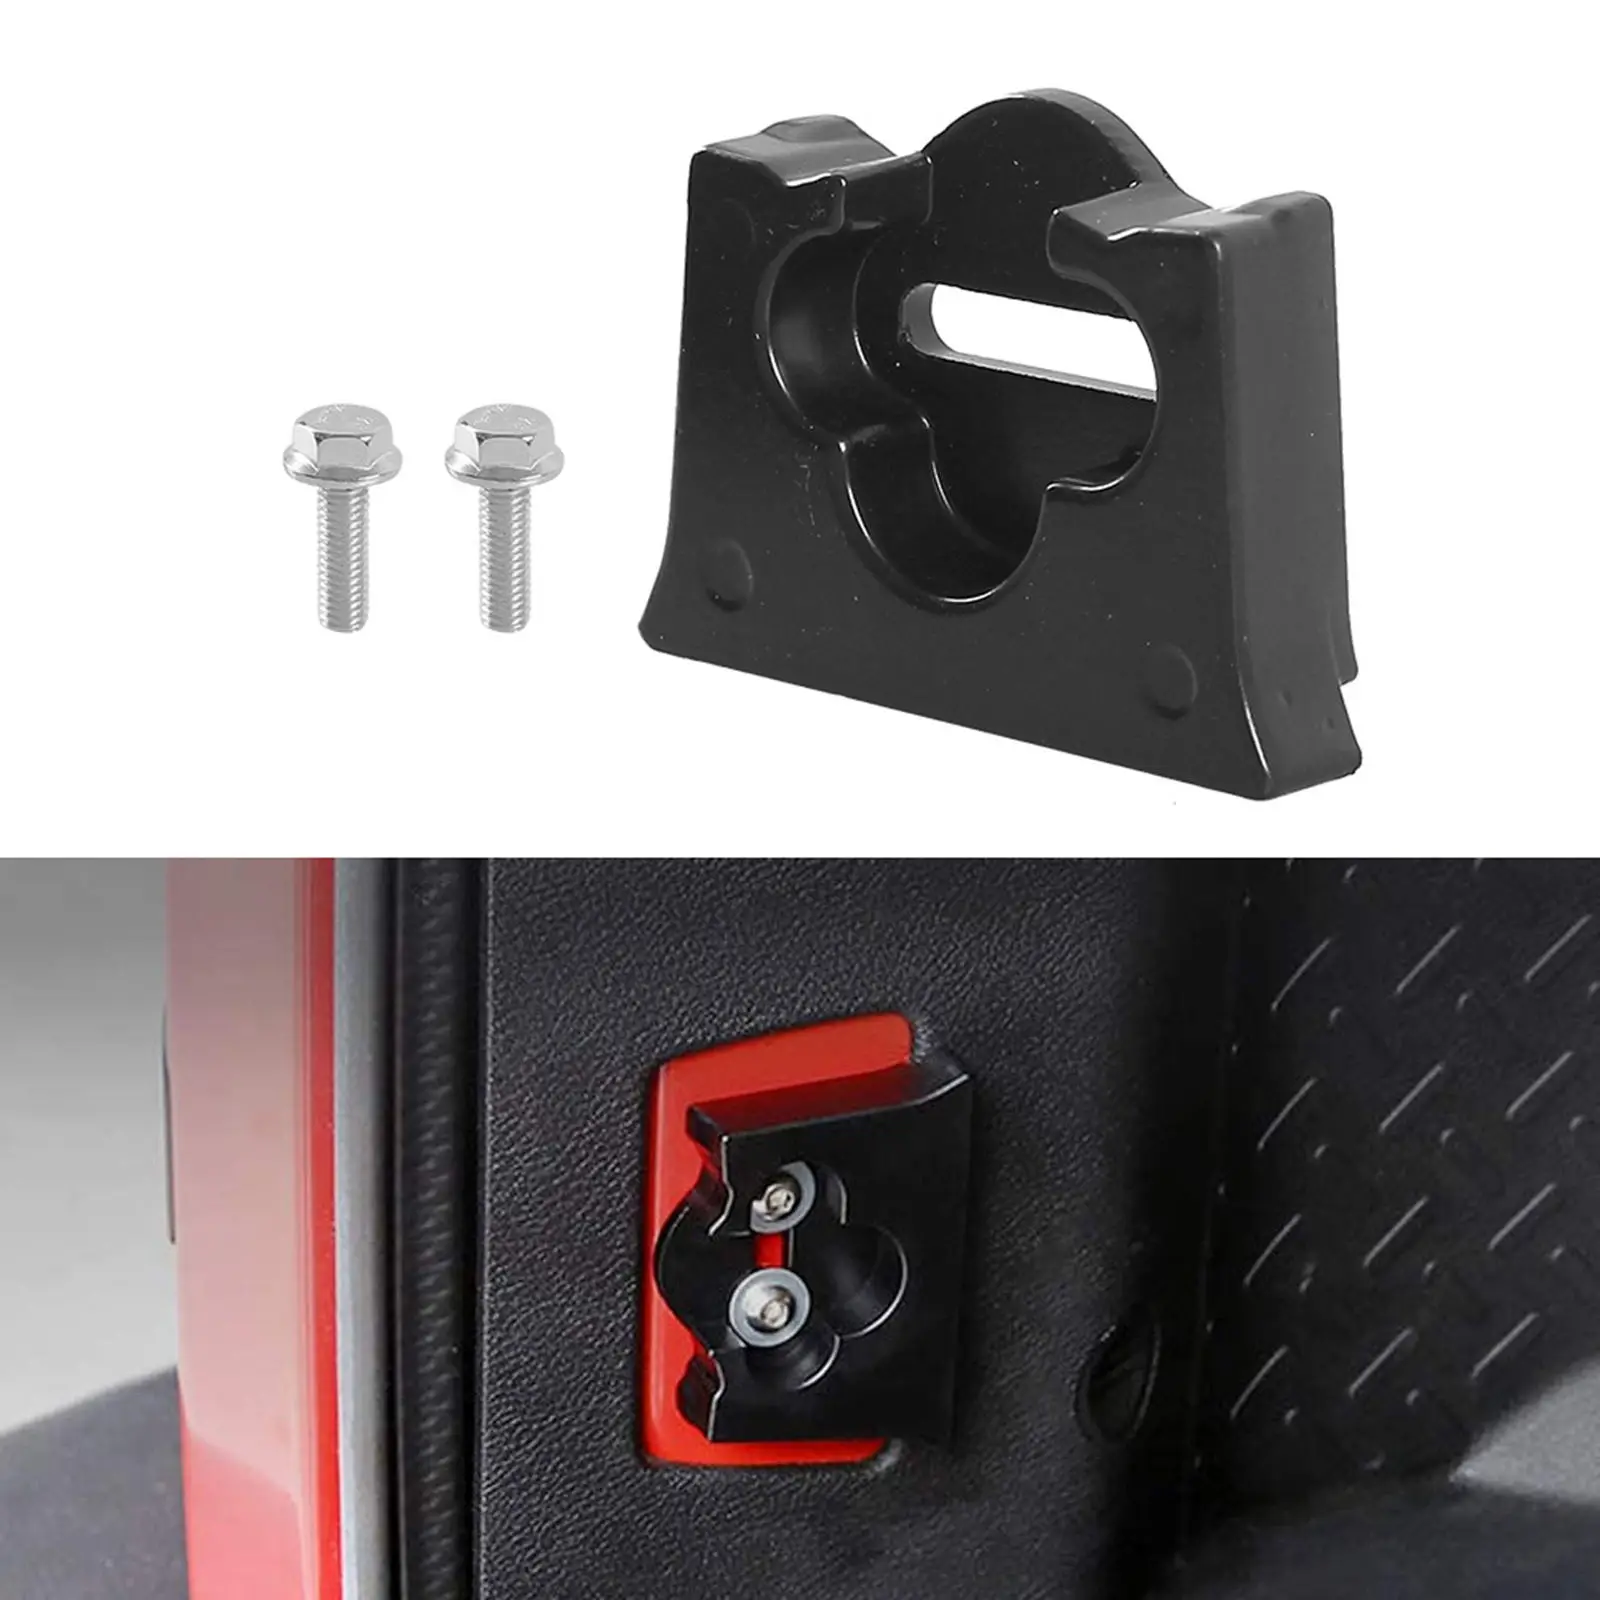 Tailgate Latch Bumper Stop Rear Limit Block Cover Fit for Wrangler JK JKU 07-17 Eliminate Excess Movement Tailgate Alignment